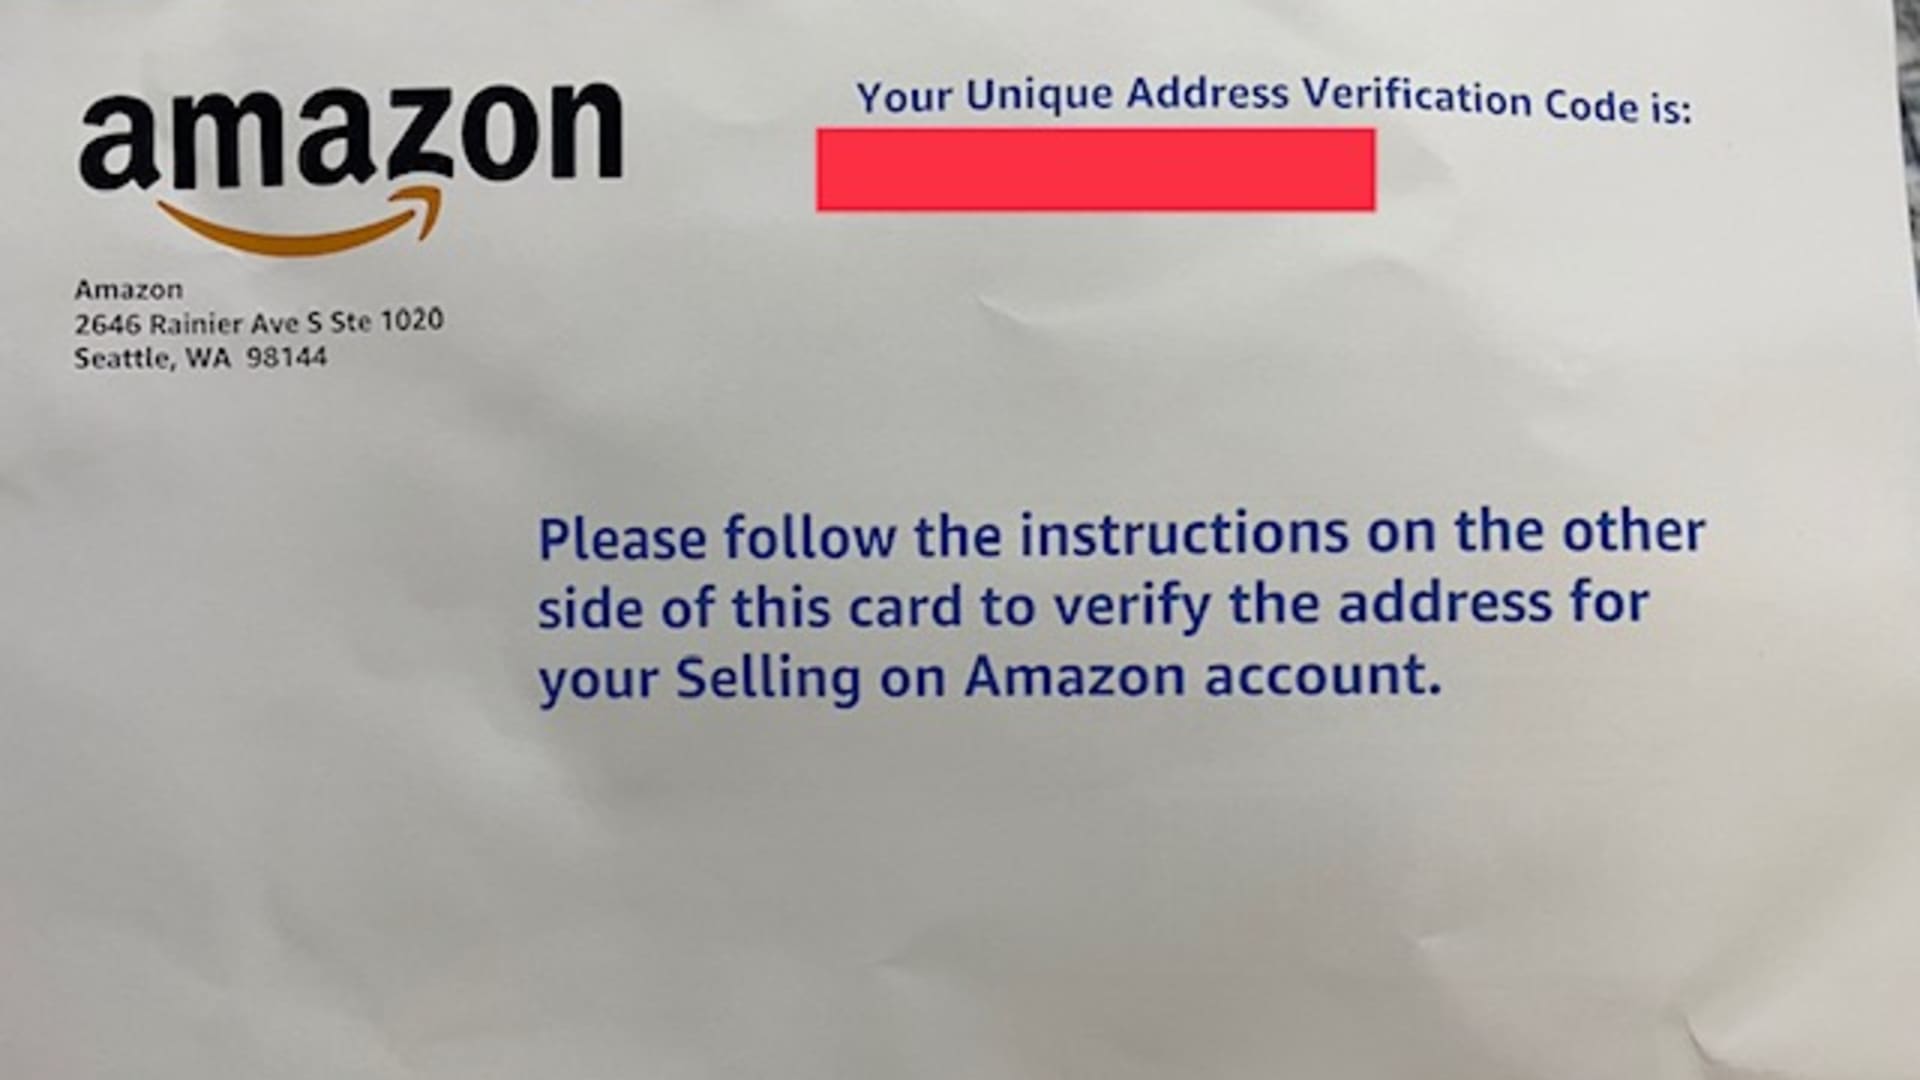 Amazon is mailing postcards like this one to third-party sellers to verify the address listed on their profile.